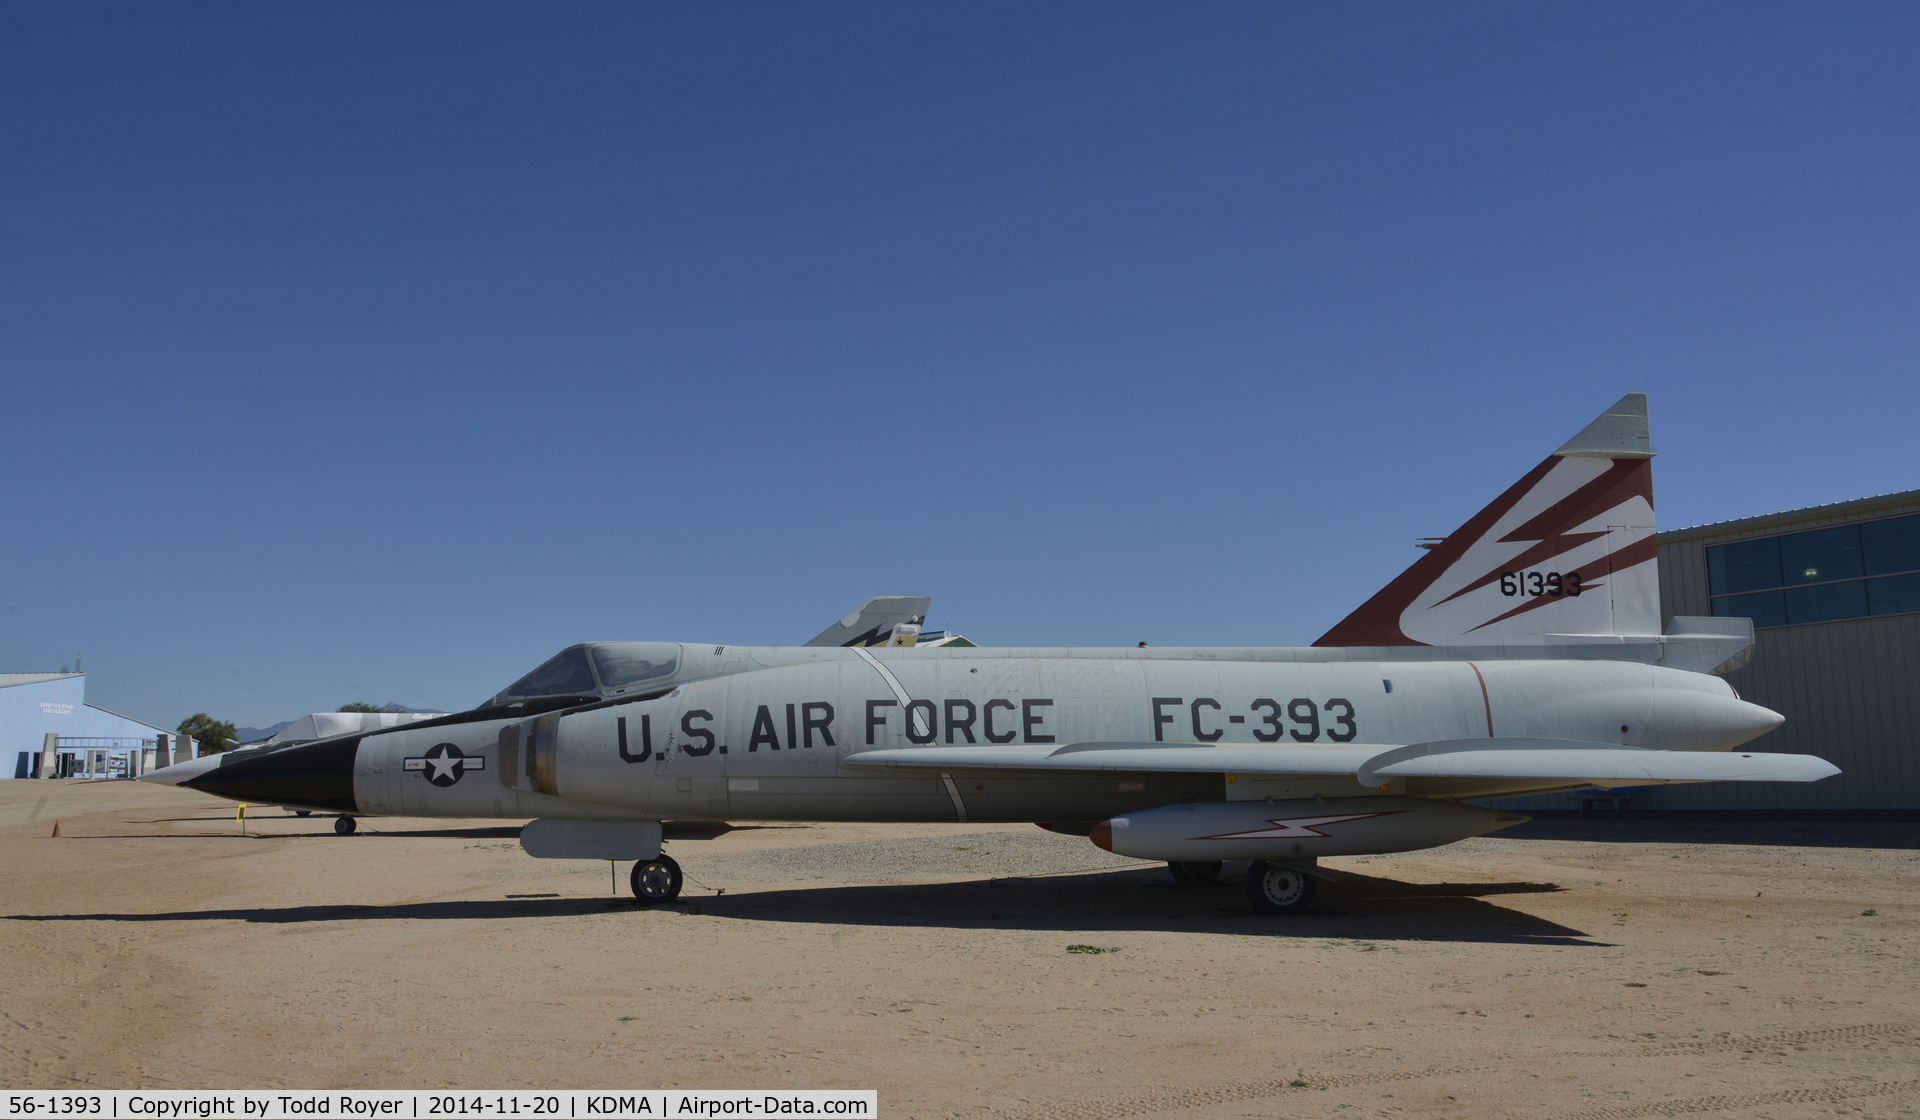 56-1393, 1956 Convair F-102A Delta Dagger C/N 8-10-340, On display at the Pima Air and Space Museum